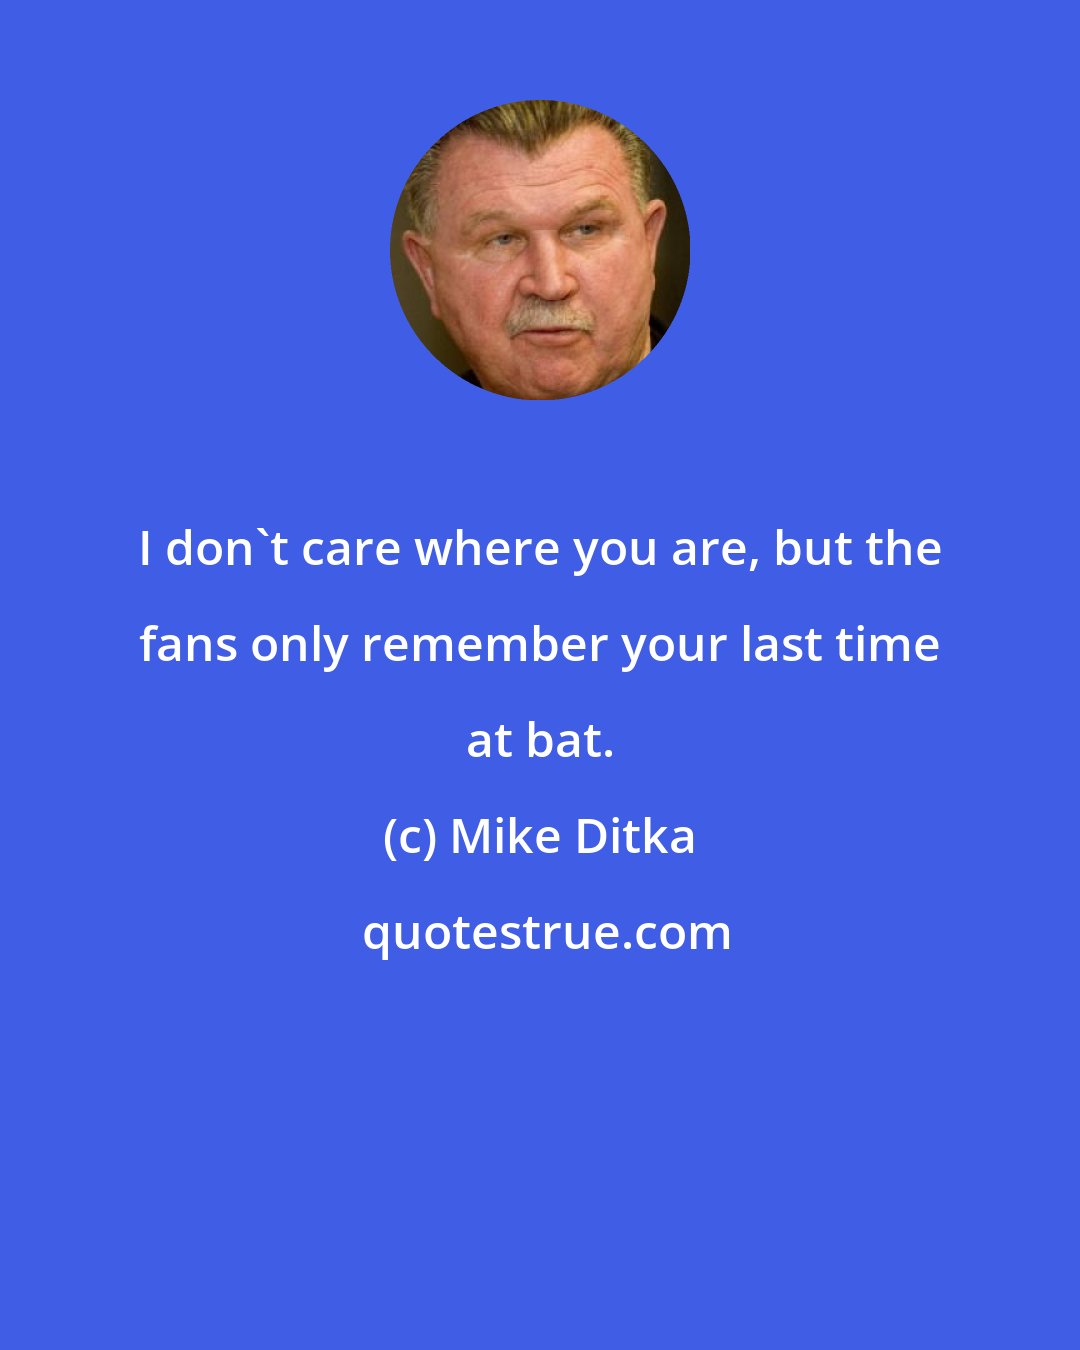 Mike Ditka: I don't care where you are, but the fans only remember your last time at bat.